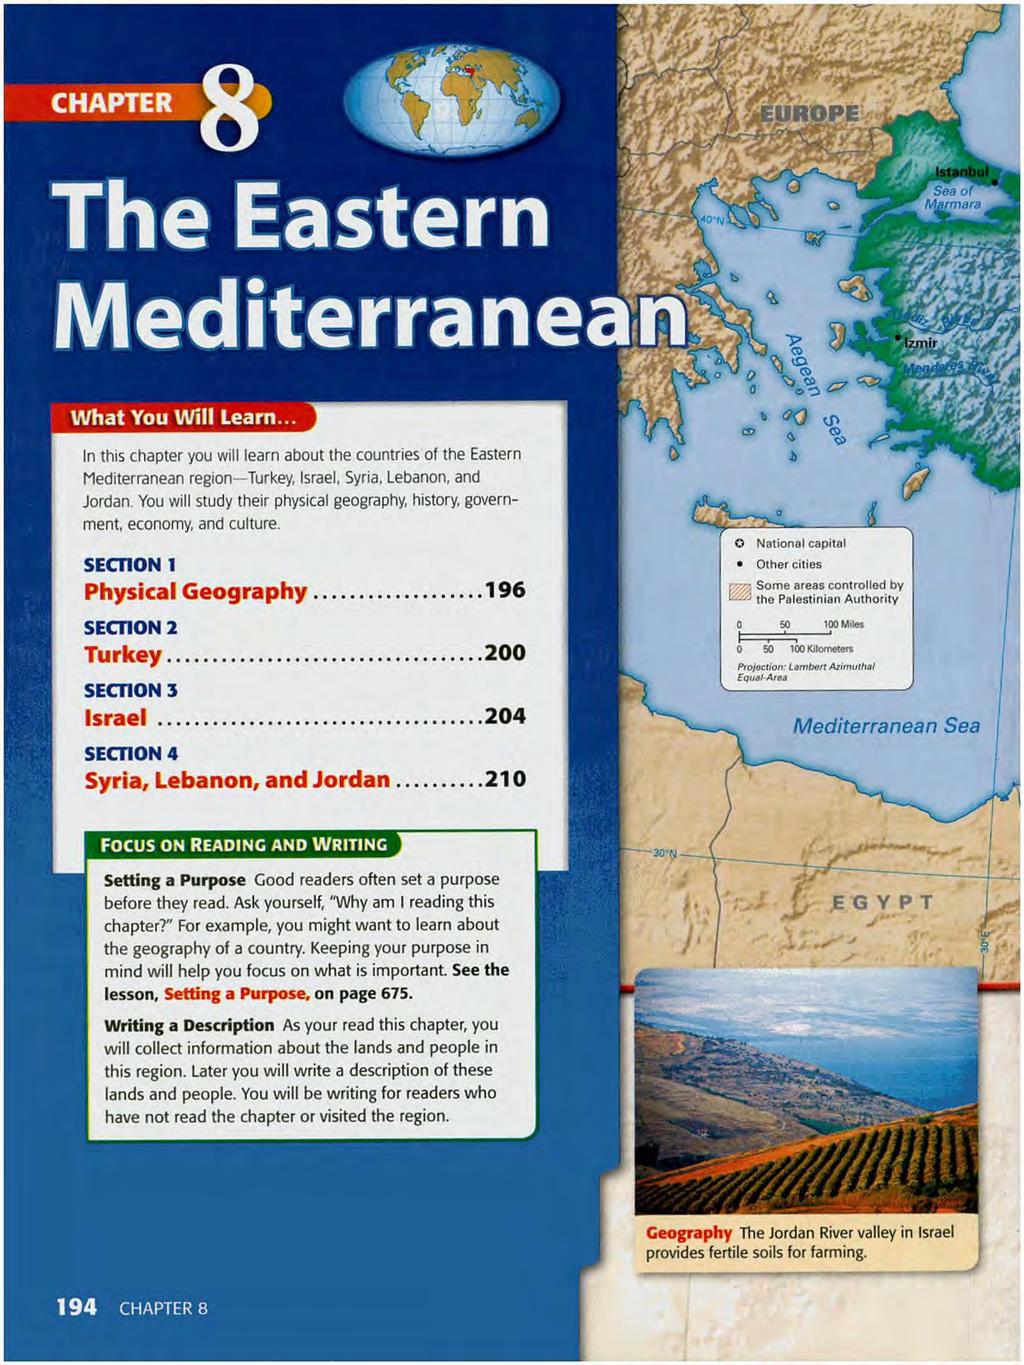 Sea of Marmara W h a t You W ill Leam In this chapter you will learn about the countries of the Eastern Mediterranean region Turkey, Israel, Syria, Lebanon, and Jordan.